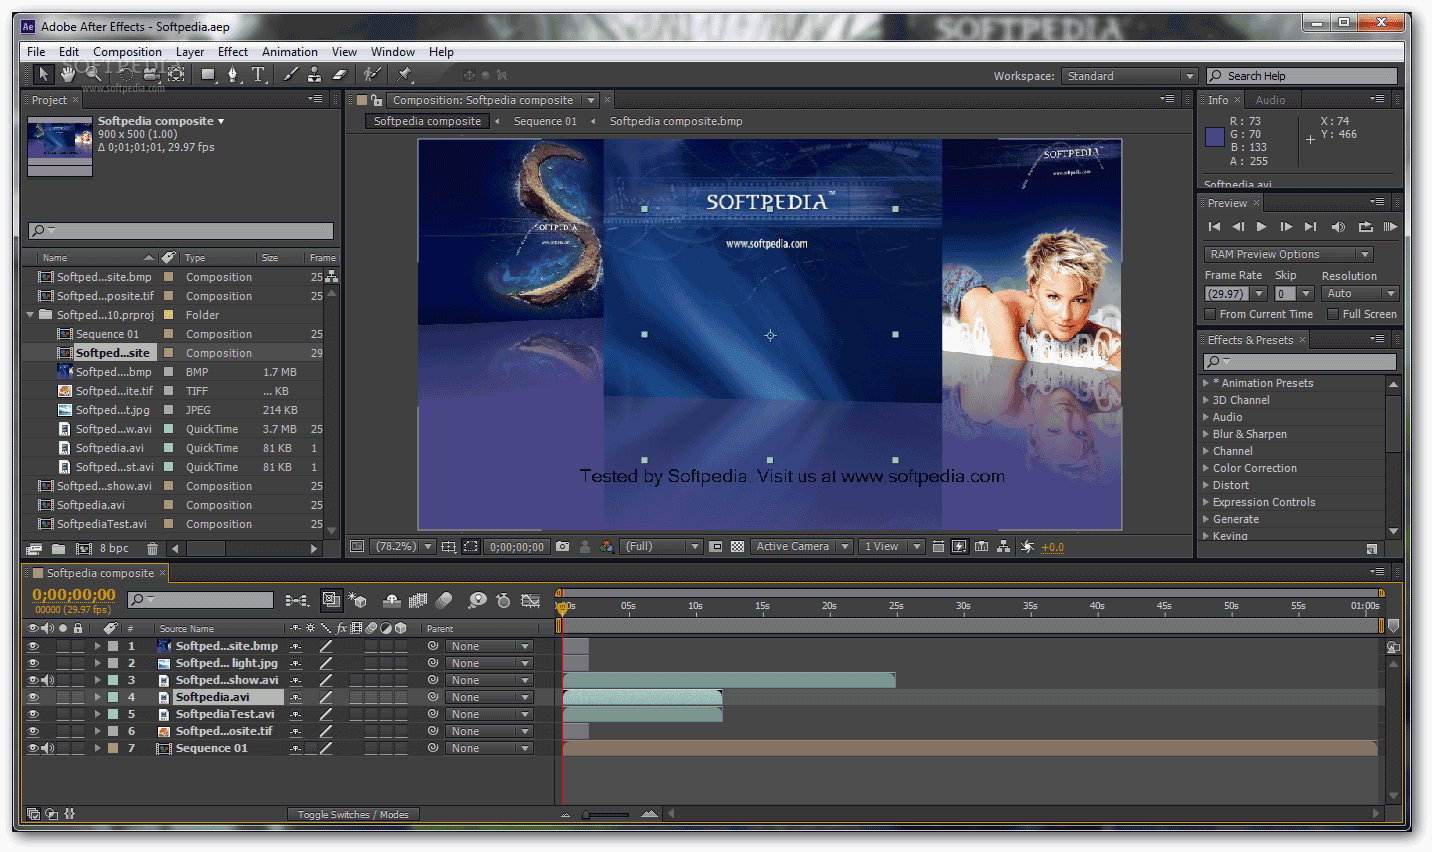 adobe after effects cs5 full version free download with crack